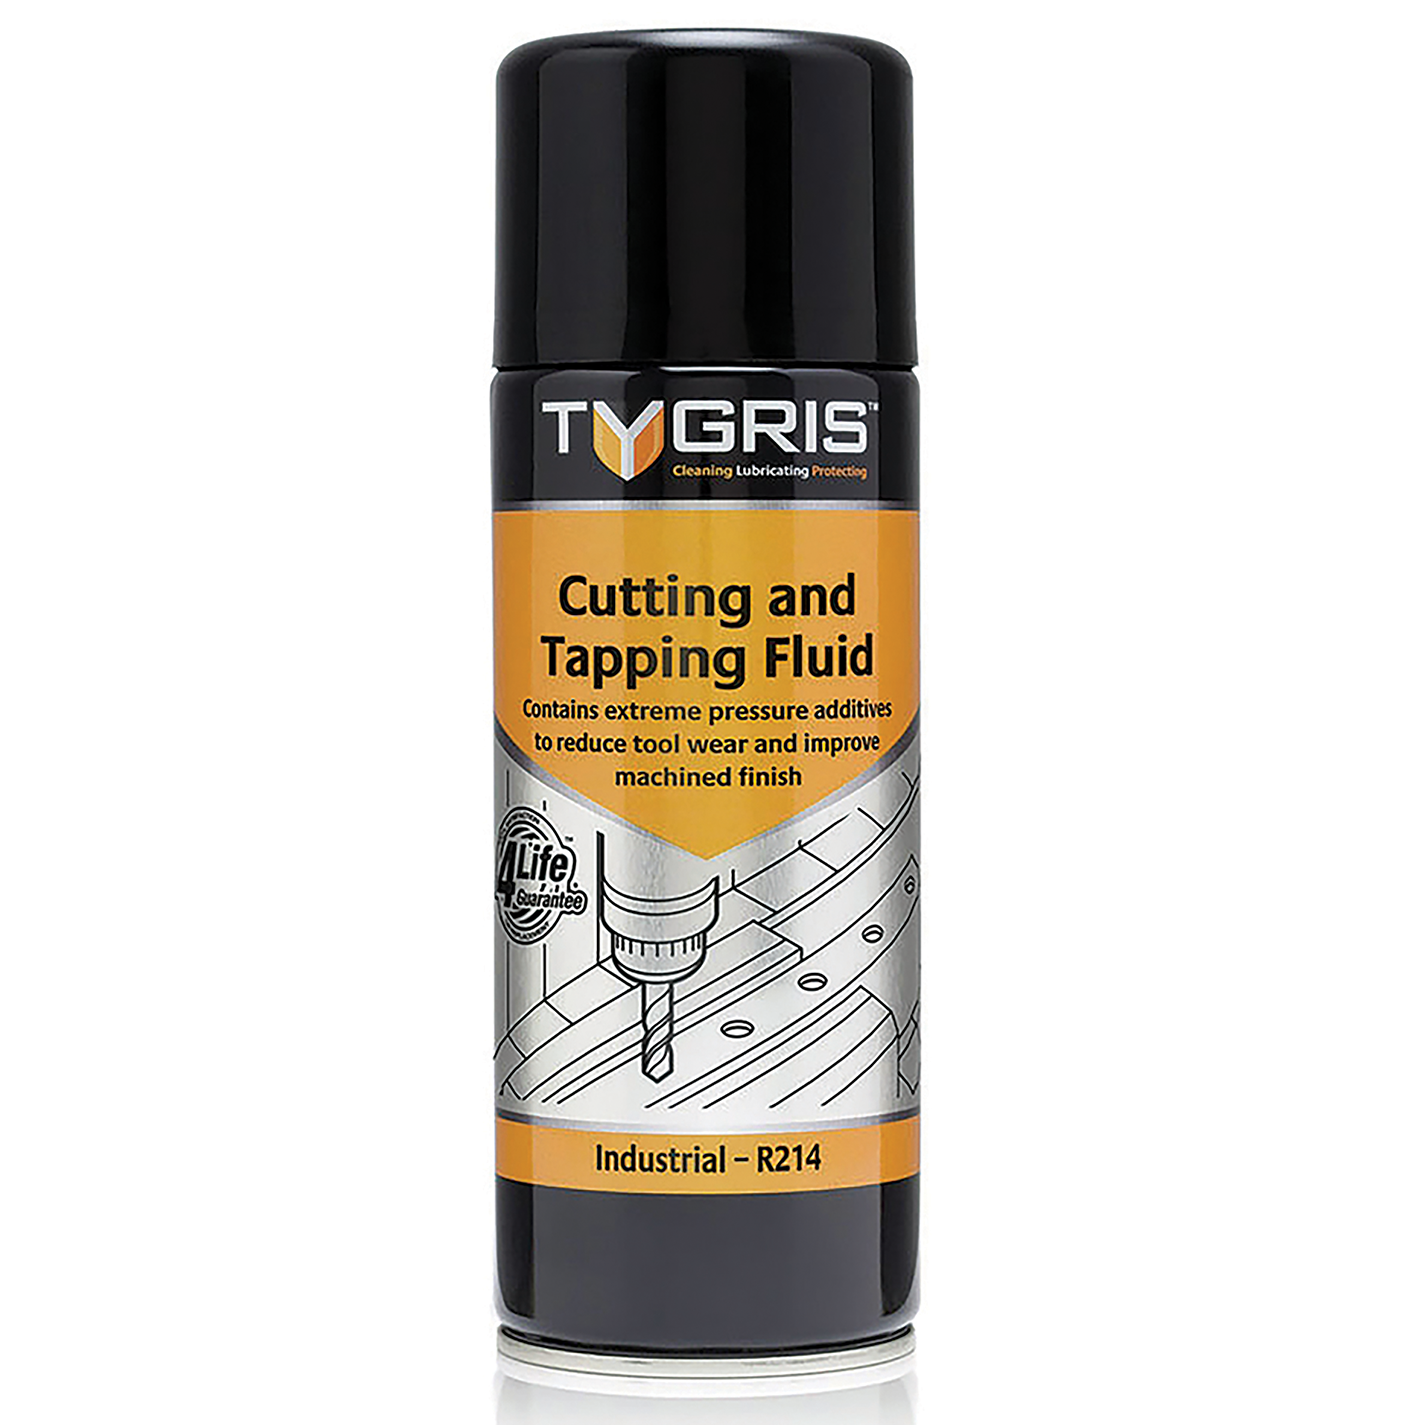 CUTTING AND TAPPING FLUID